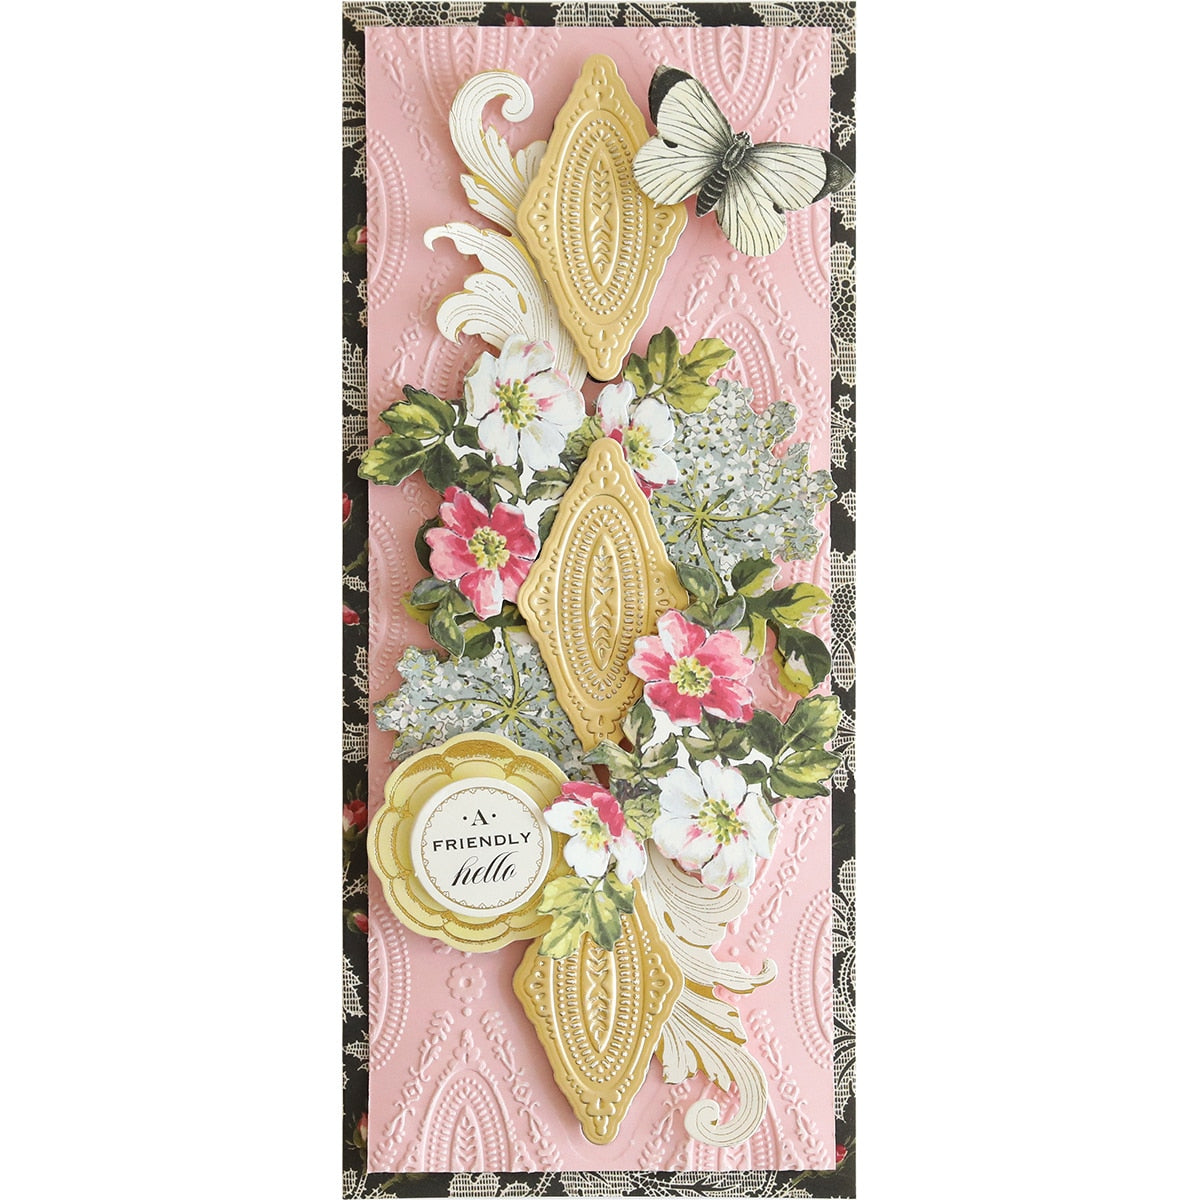 a card with a pink background and gold trim.